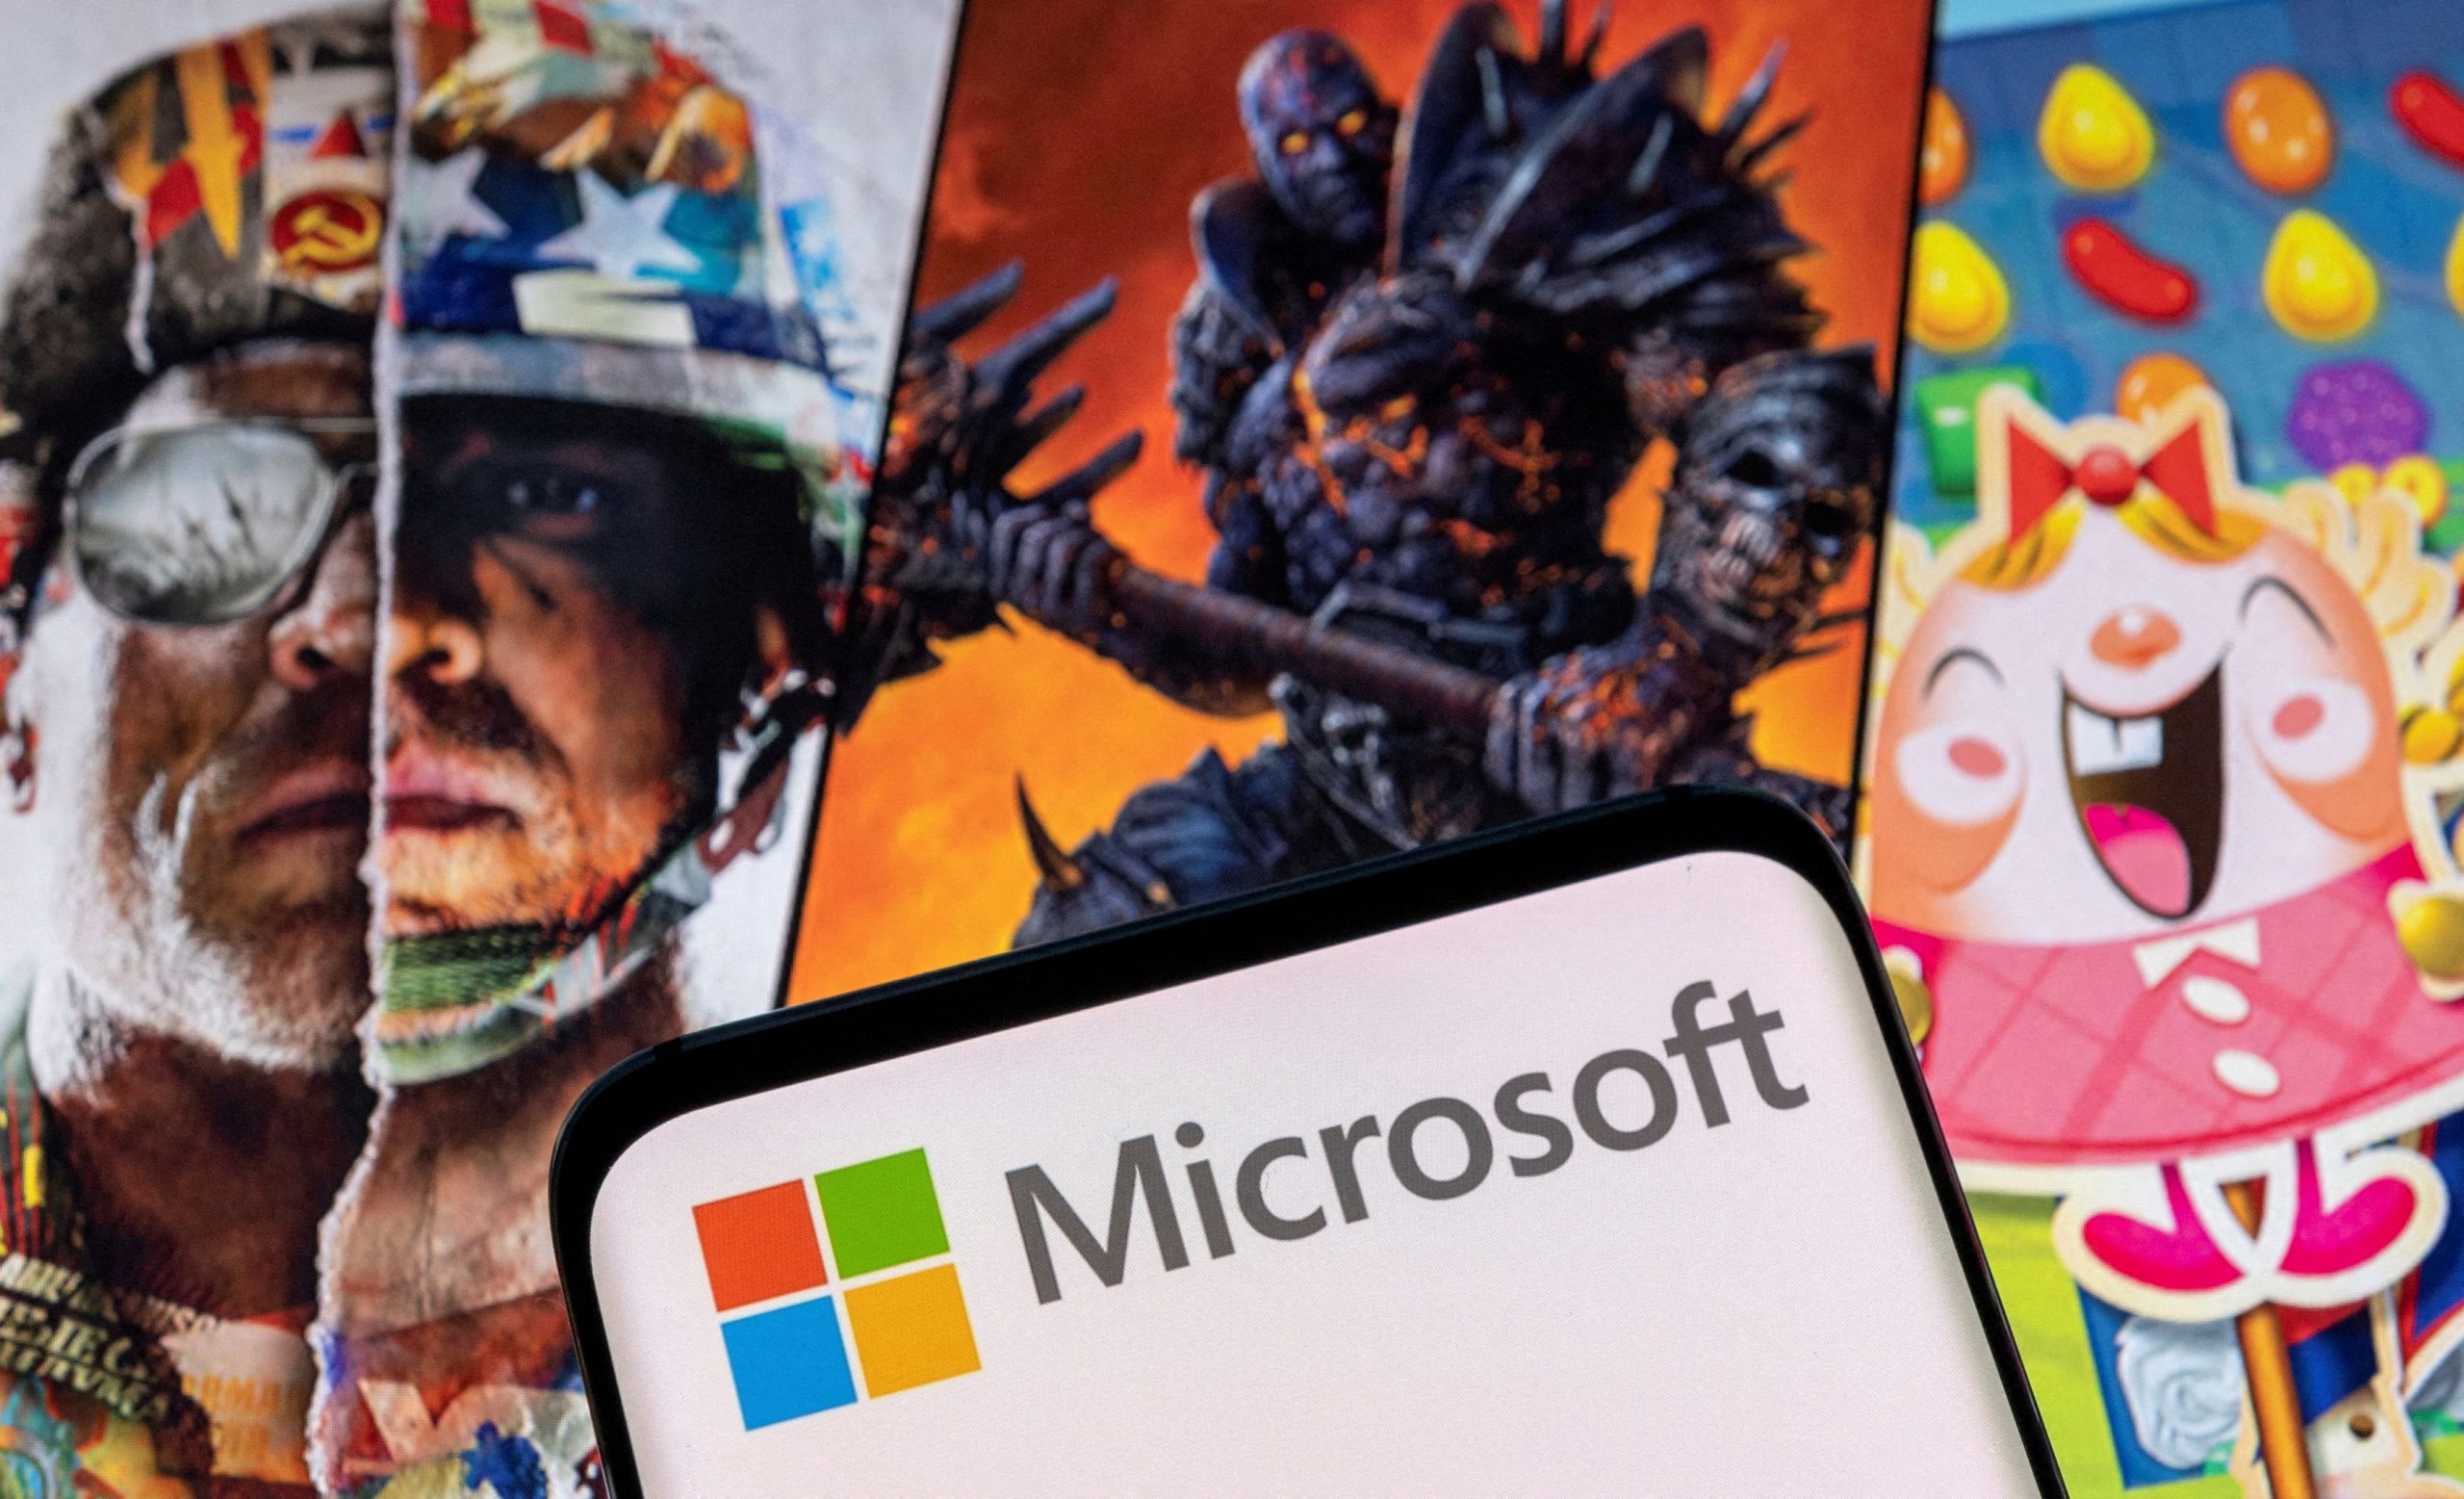 Microsoft: A New Episode in the Activision Blizzard Acquisition Series – Financial Postman